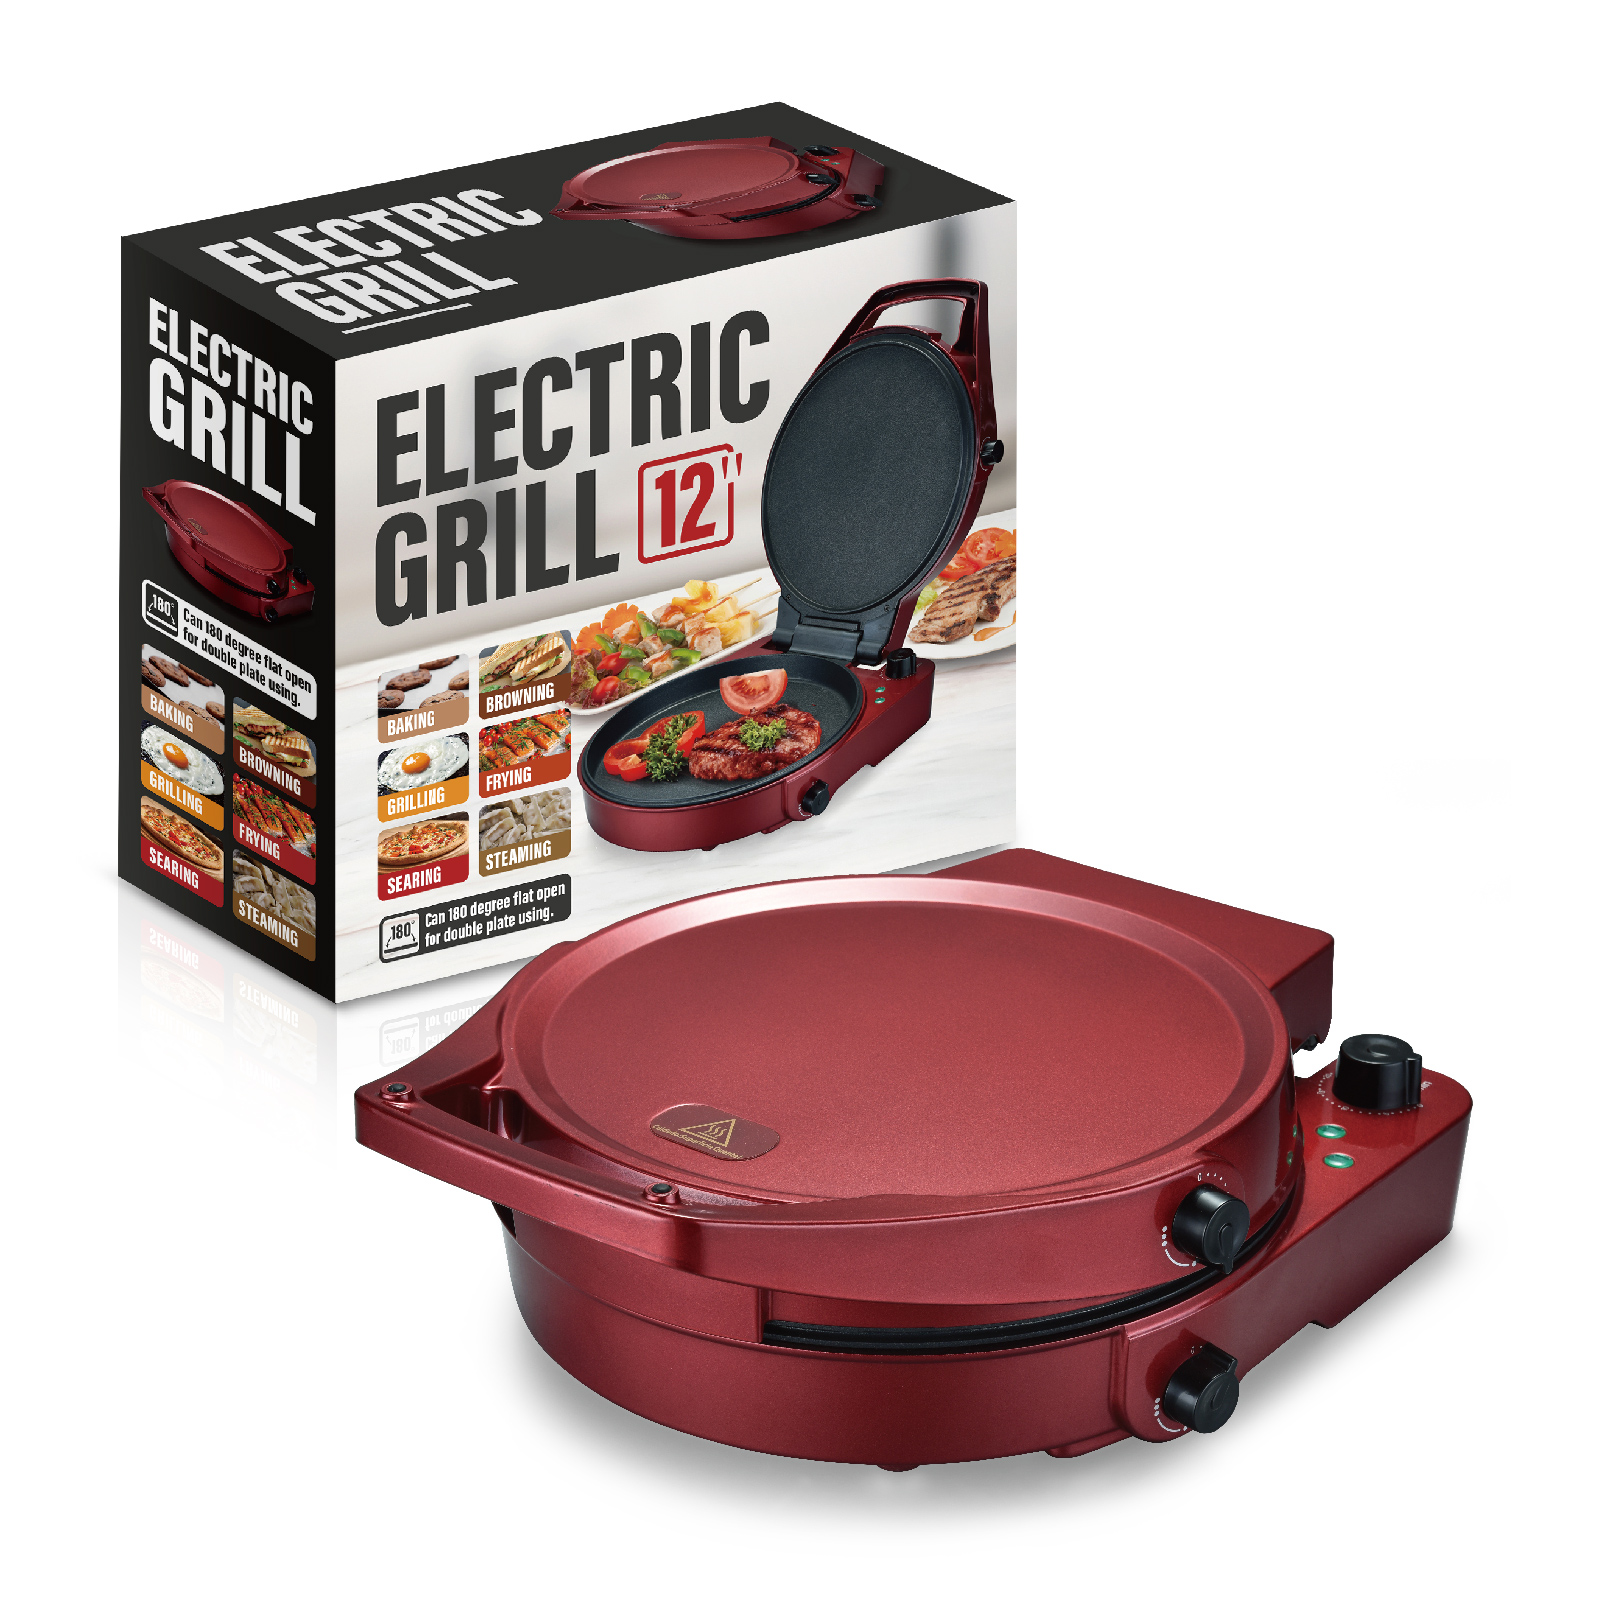 6 In 1 Electric Grill 12